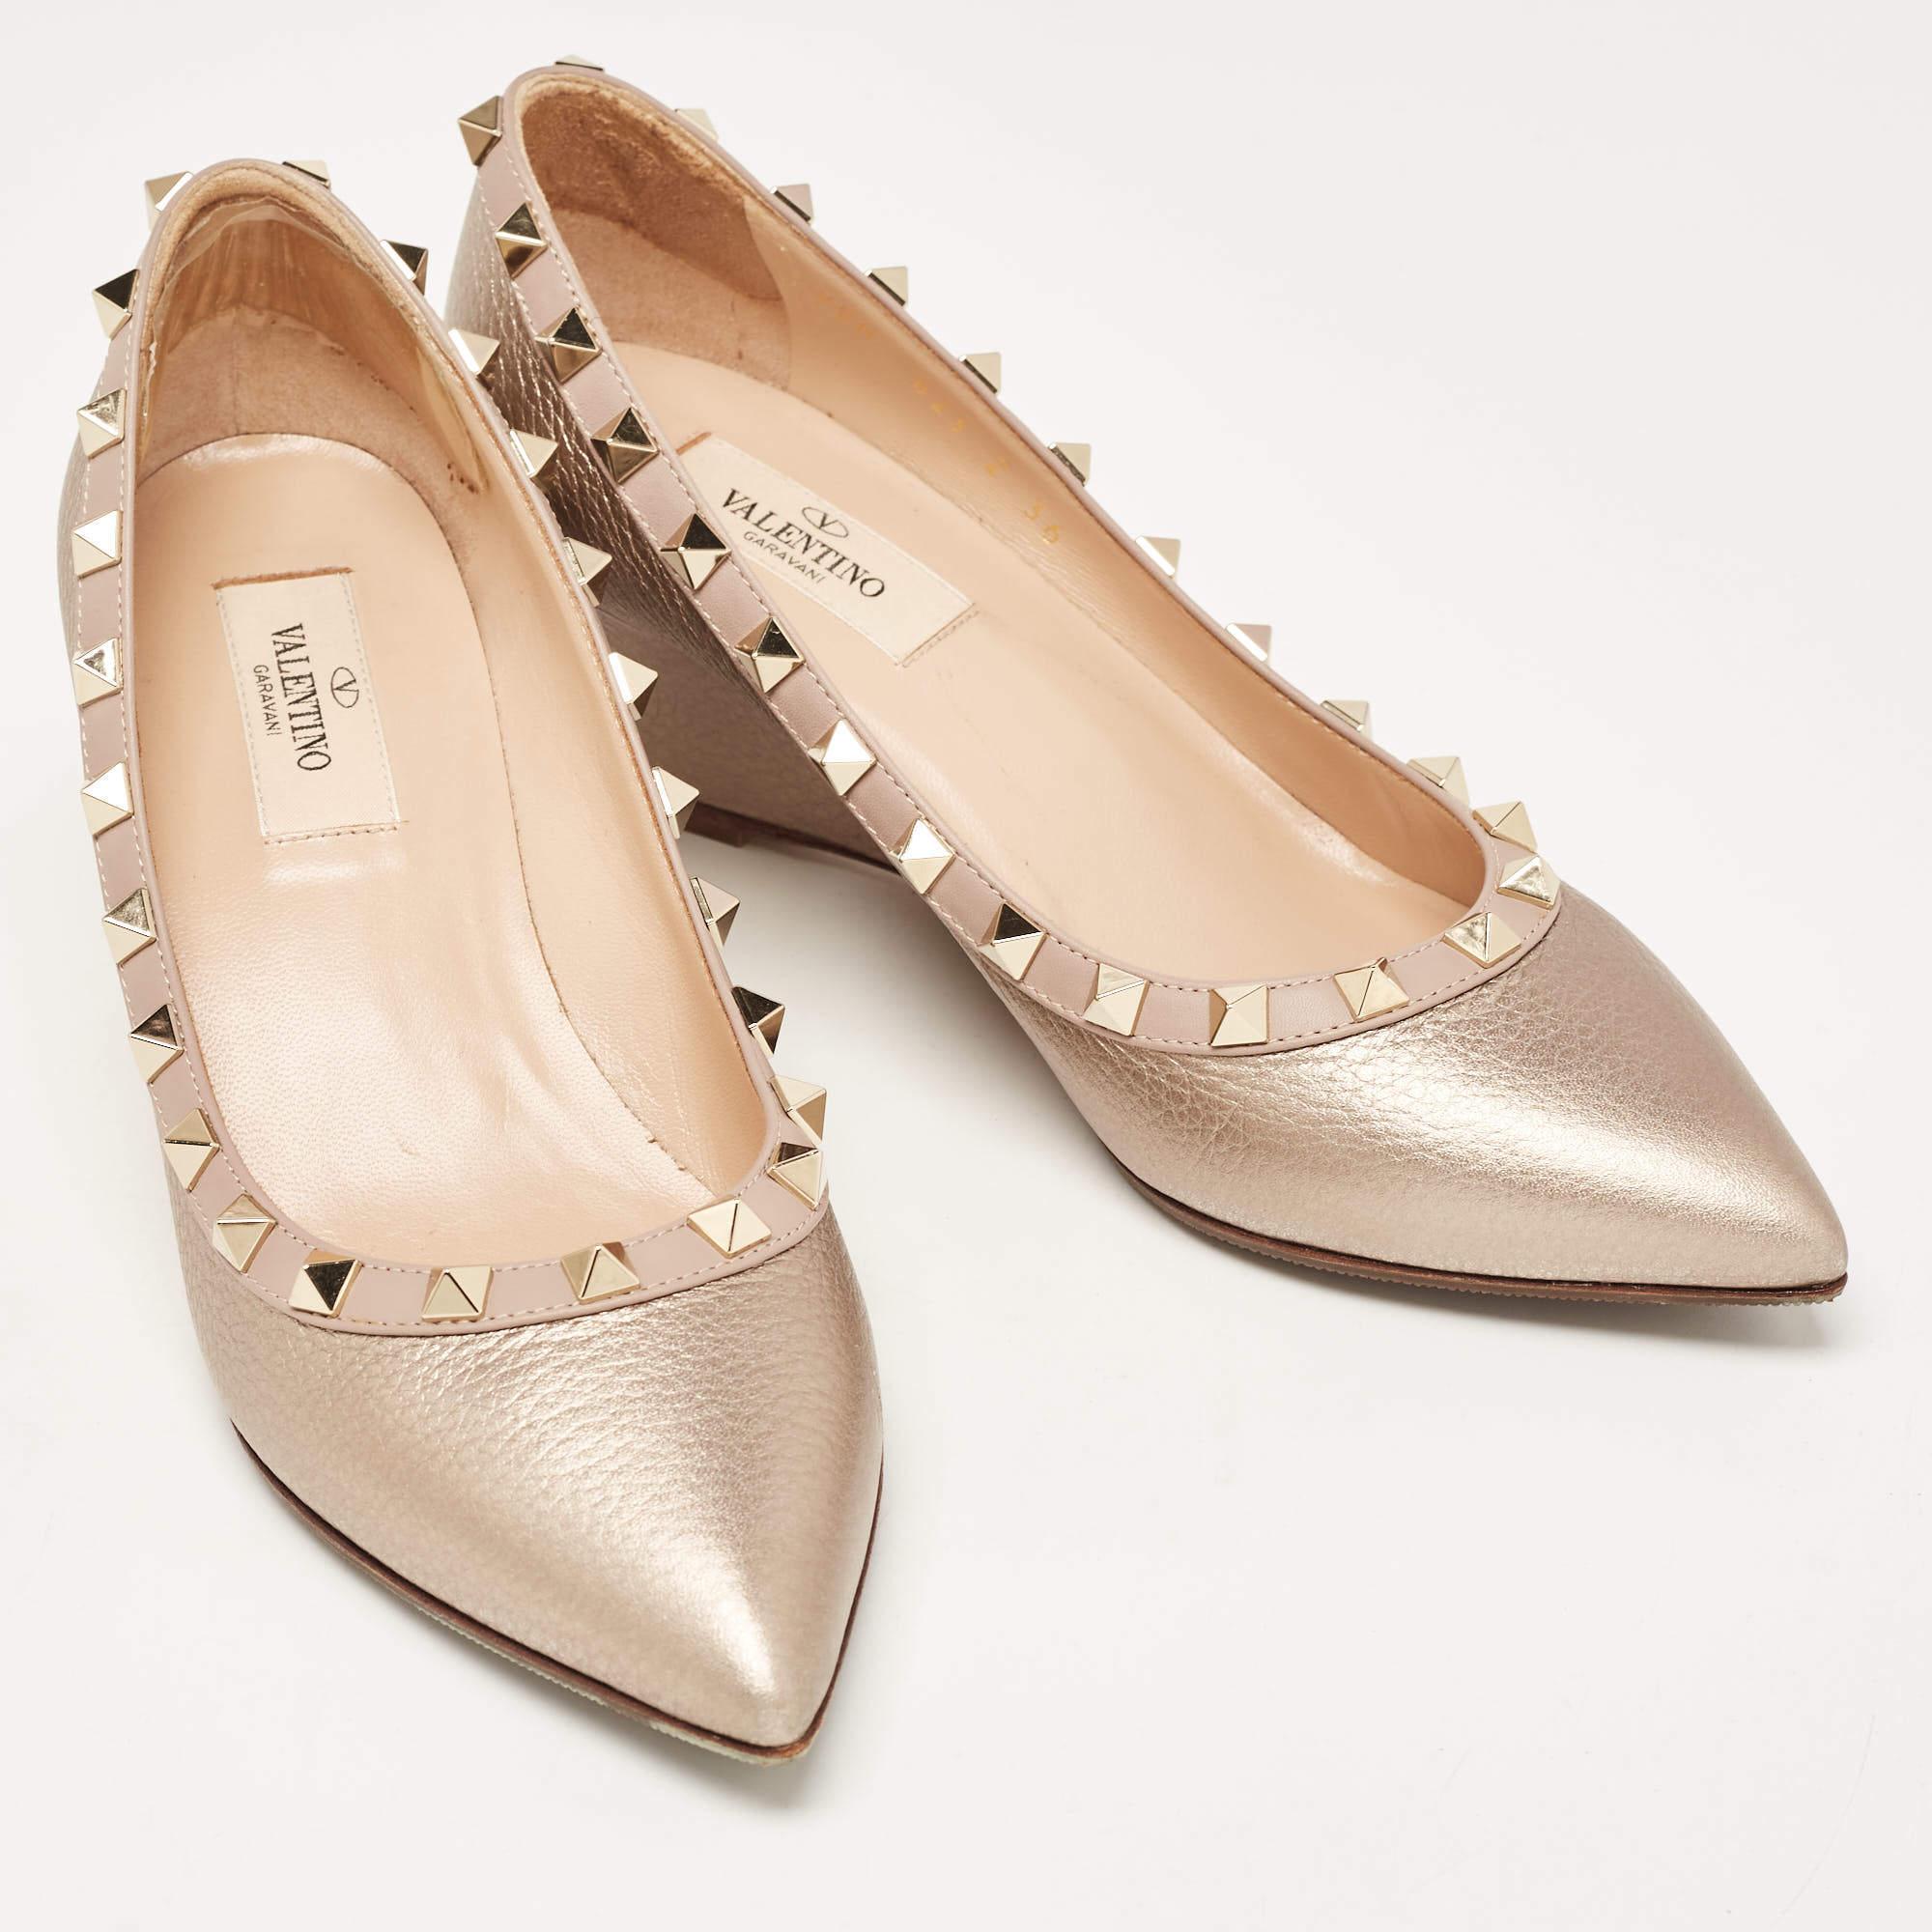 Valentino Metallic Leather Rockstud Pointed Toe Pumps Size 36 For Sale 1